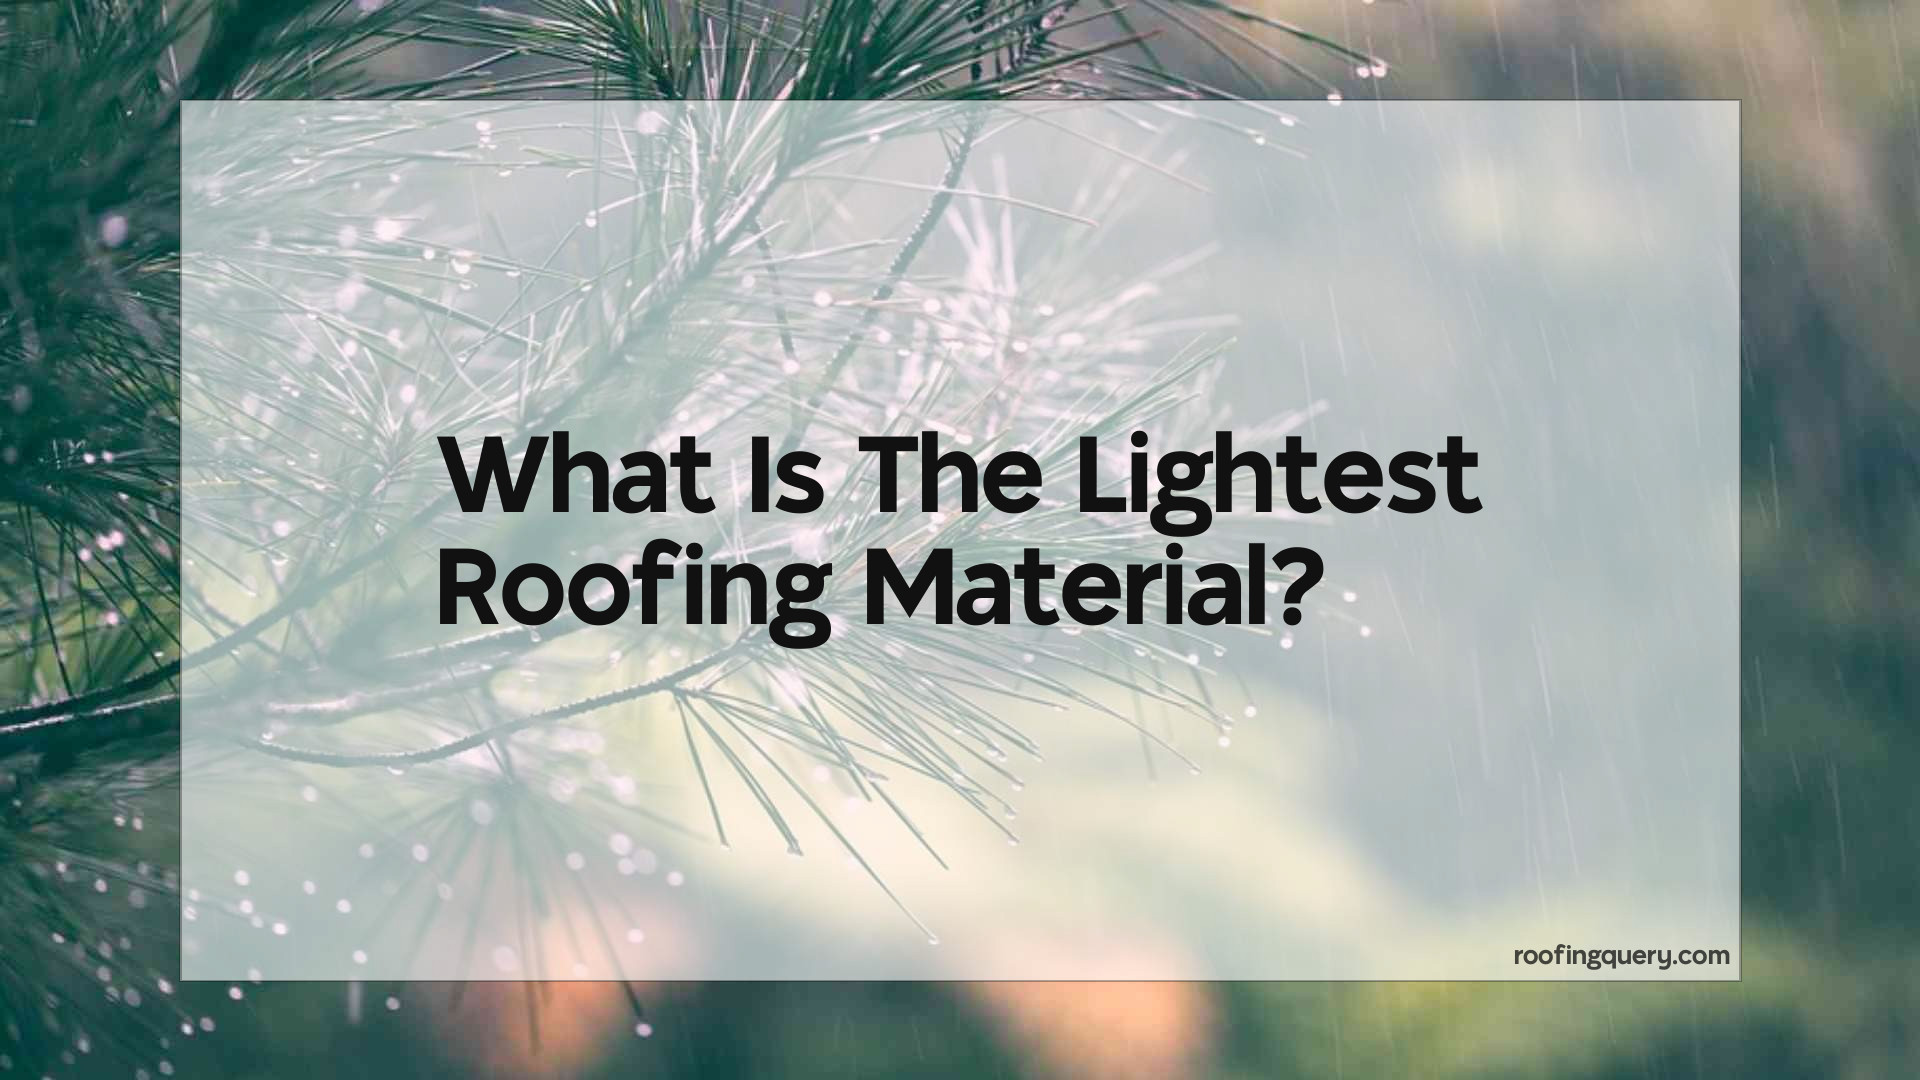 What Is The Lightest Roofing Material